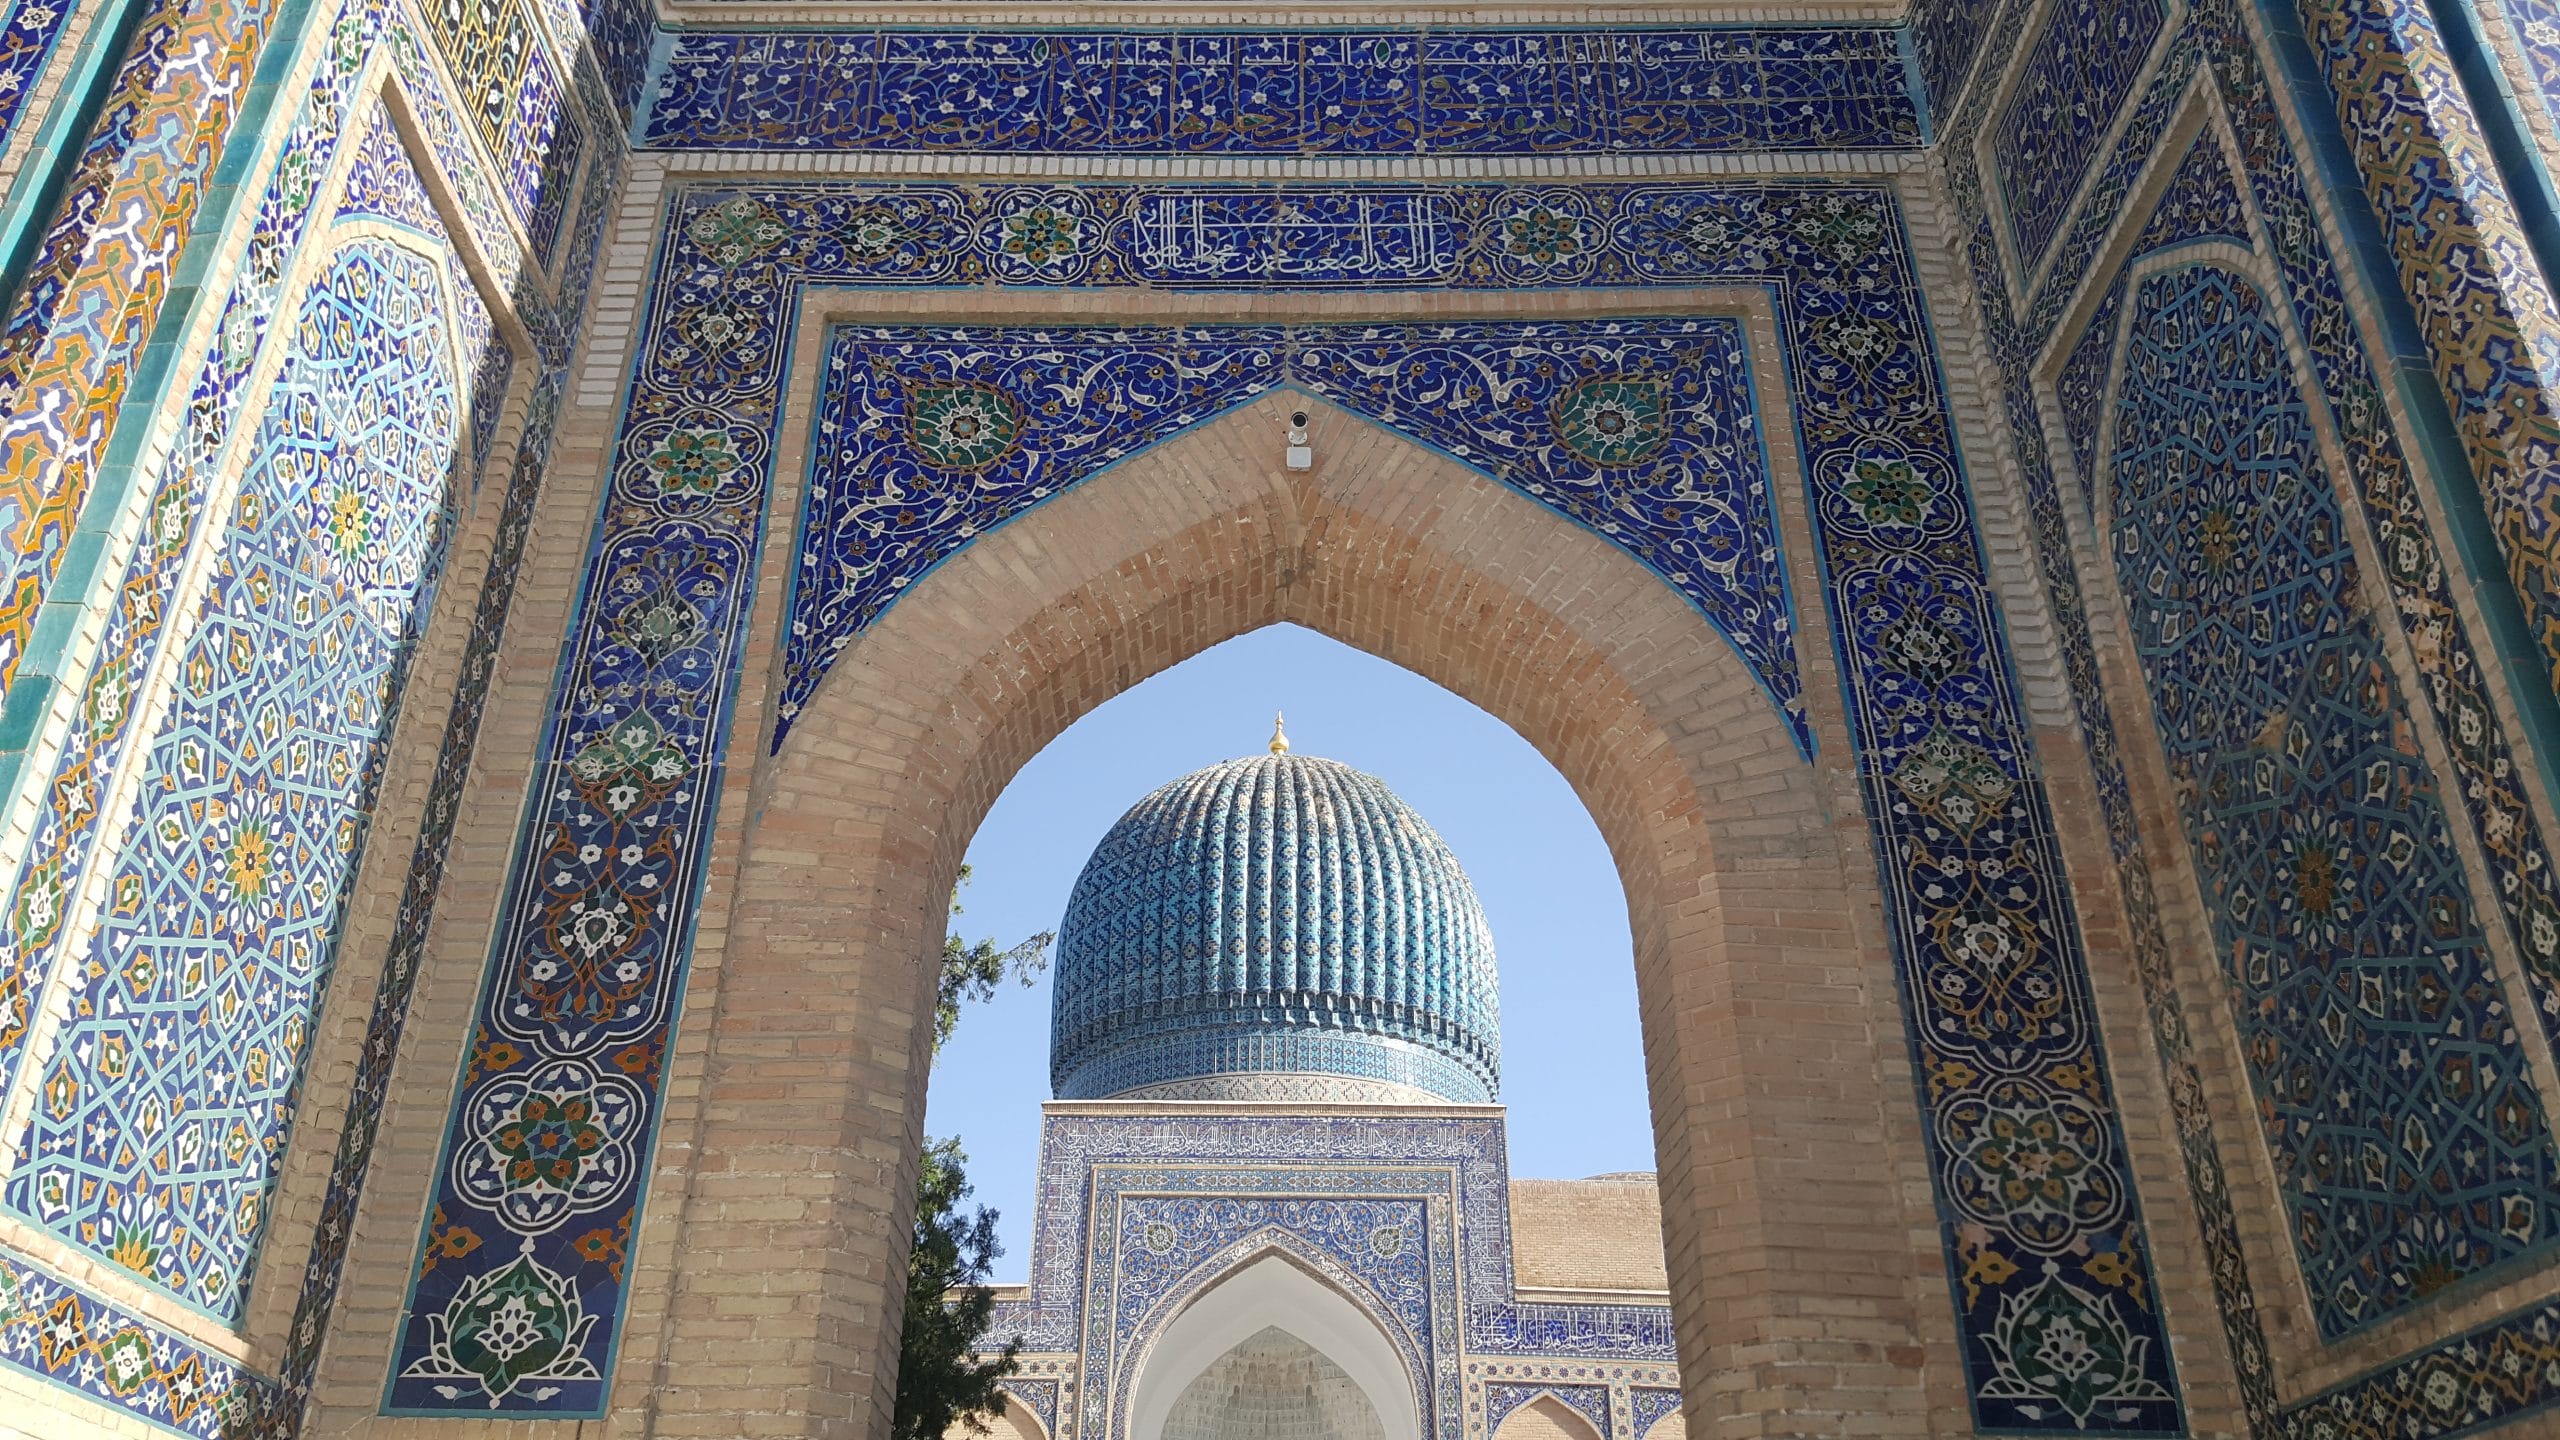 You are currently viewing 15 photos & videos of the historic silk road city of Samarkand in Uzbekistan